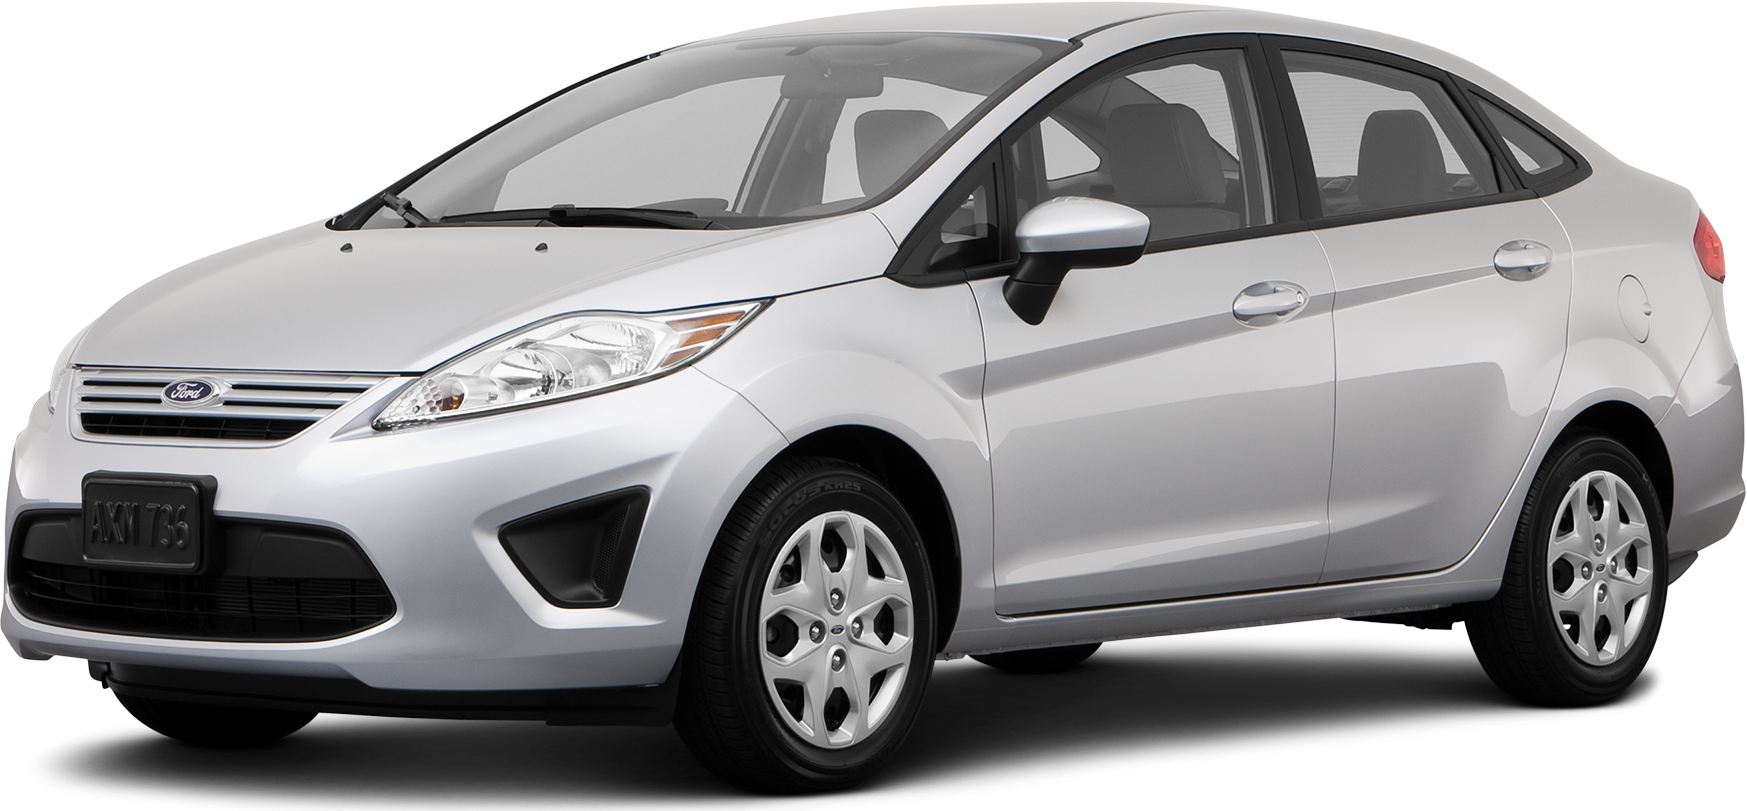 2013 Ford Fiesta Price, Value, Ratings & Reviews